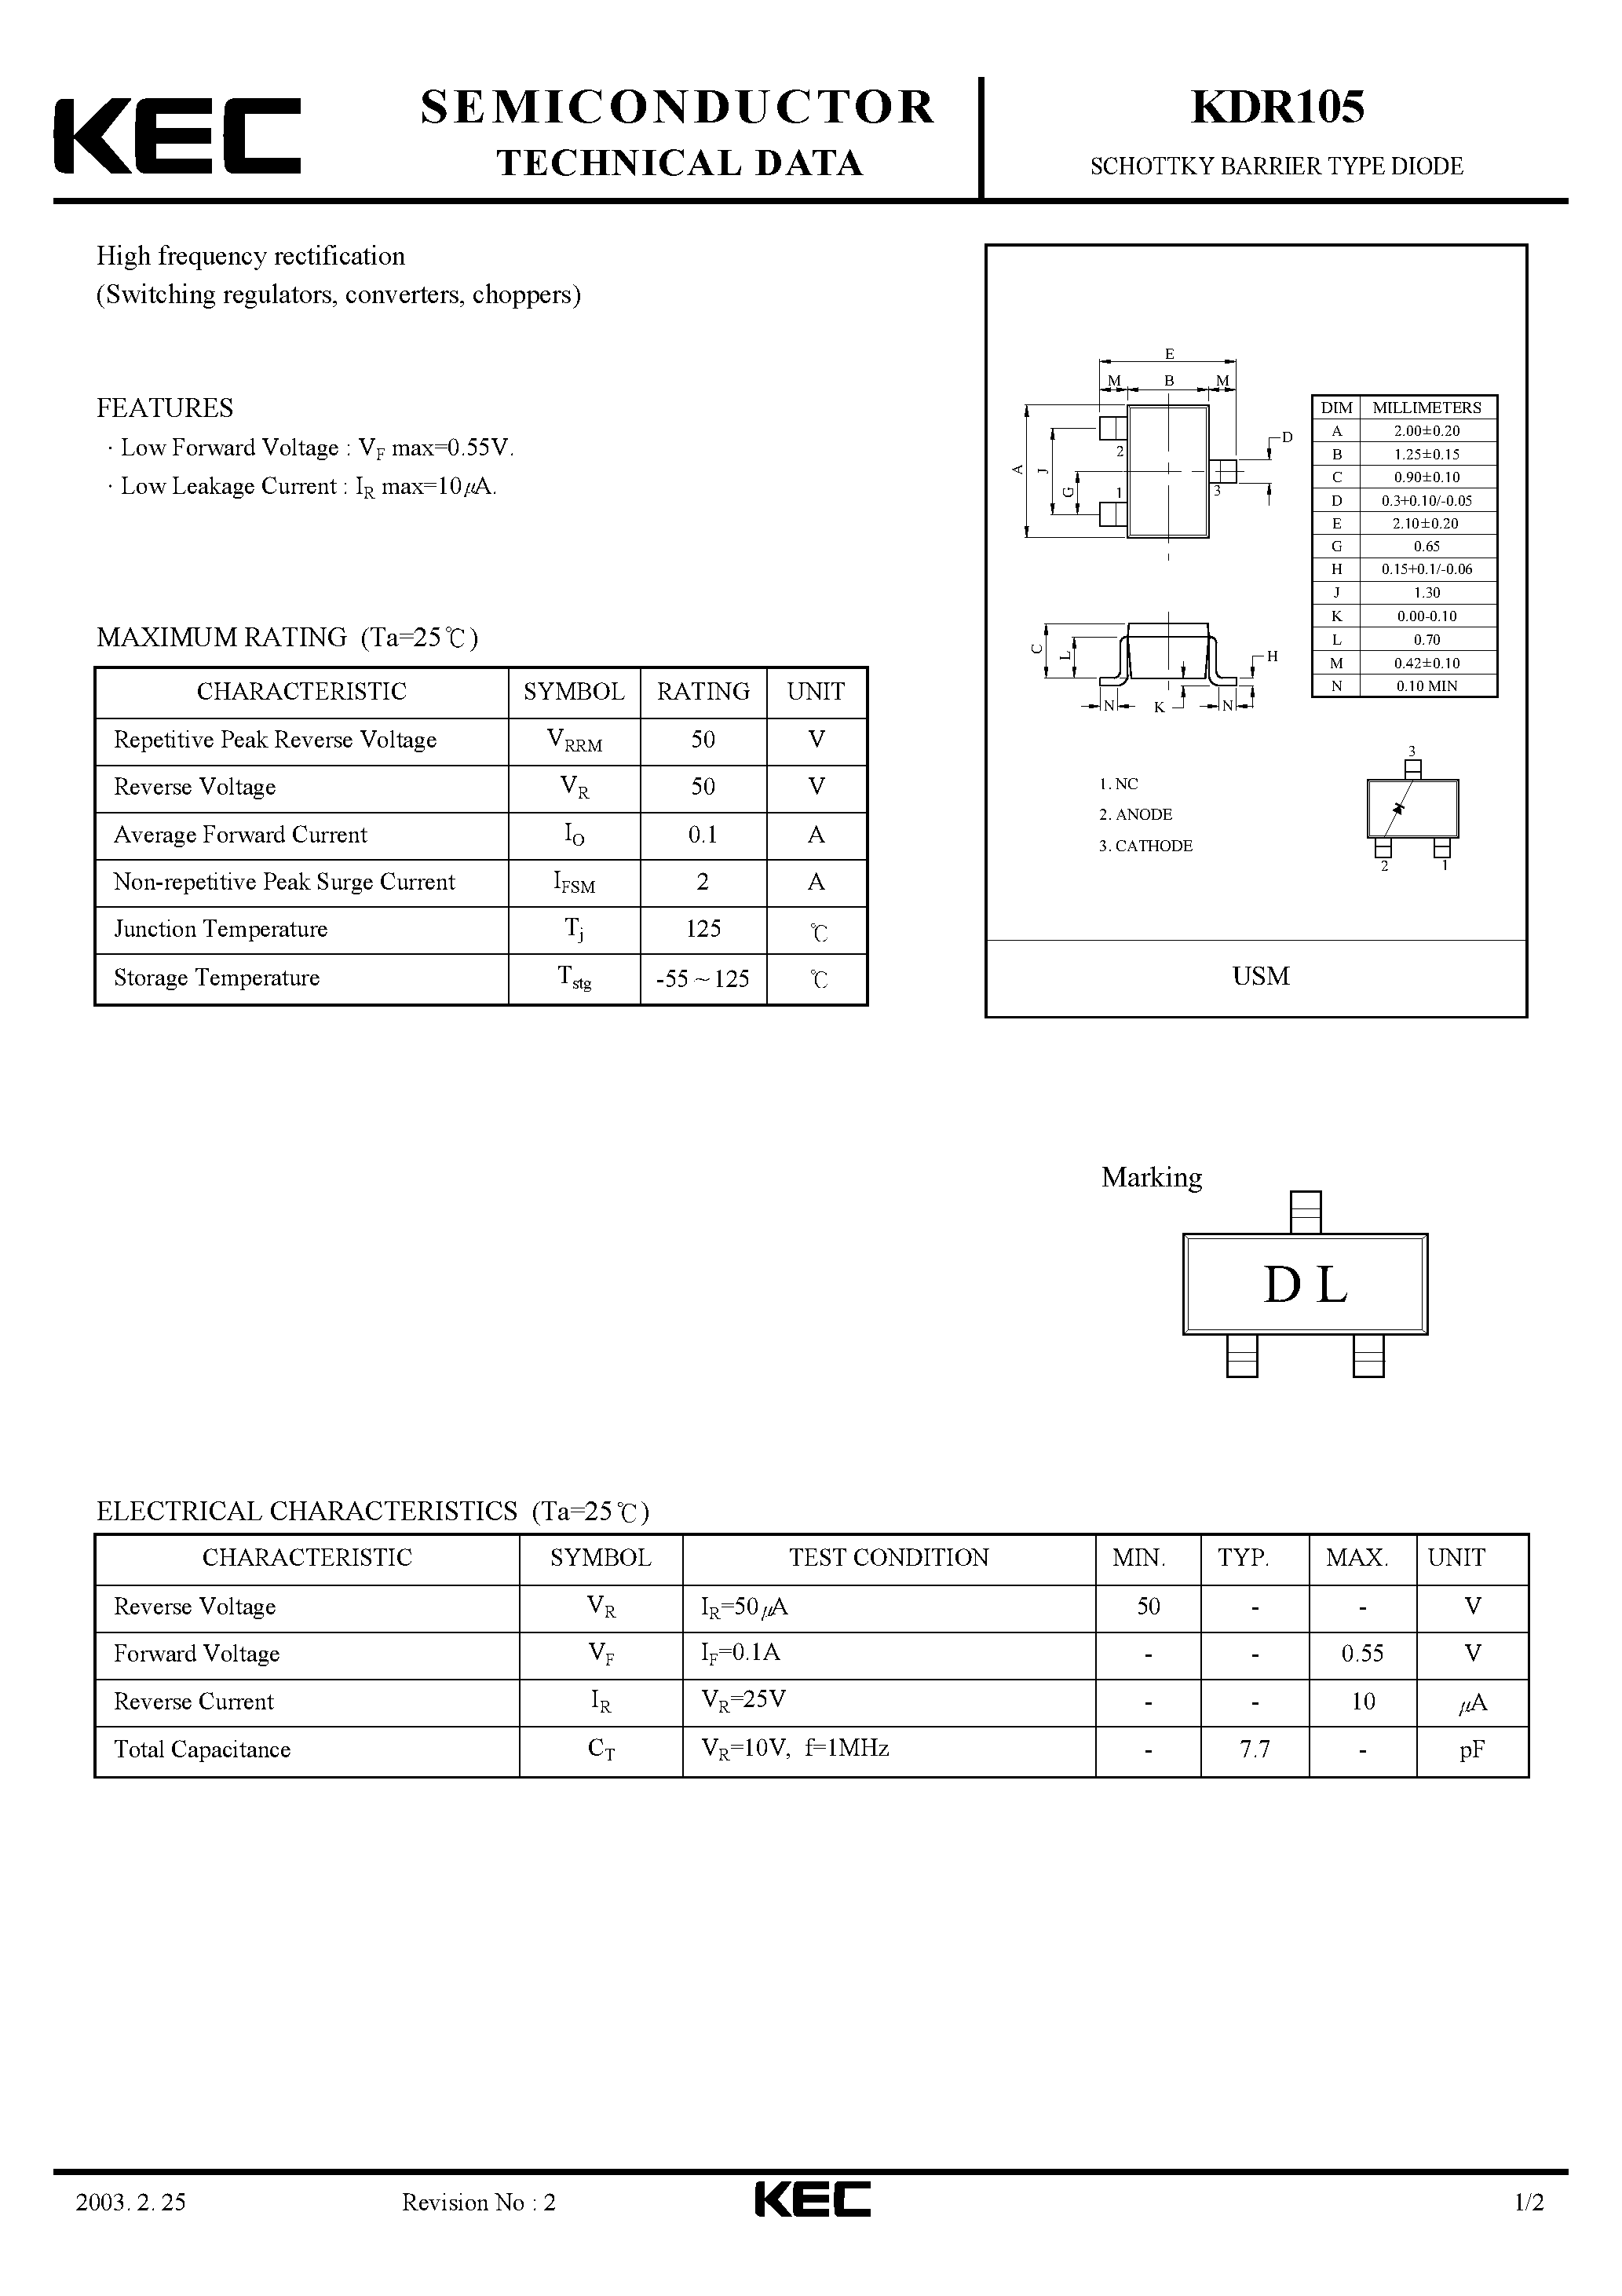 Datasheet KDR105 - SCHOTTKY BARRIER TYPE DIODE(HIGH FREQUENCY RECTIFICATION) page 1